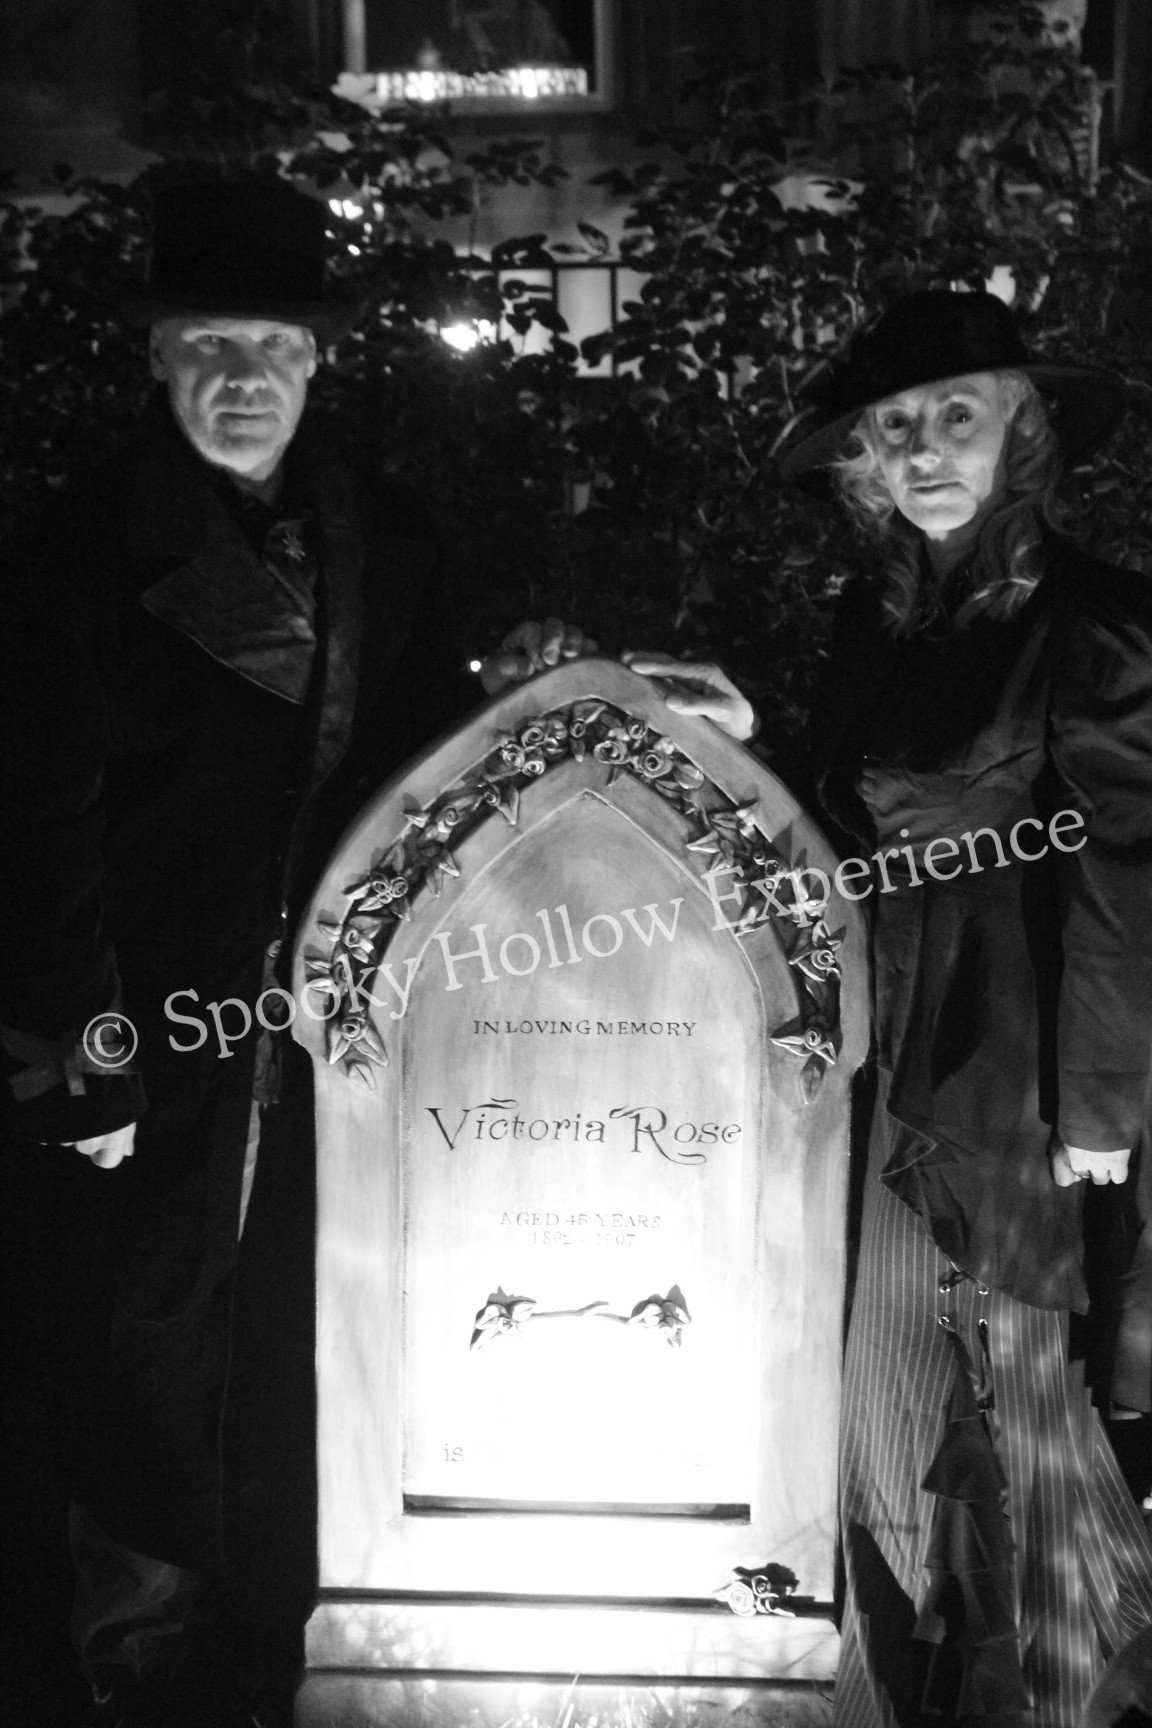 Spooky Hollow Experience copyright Olde Hollow Cemetery artisans